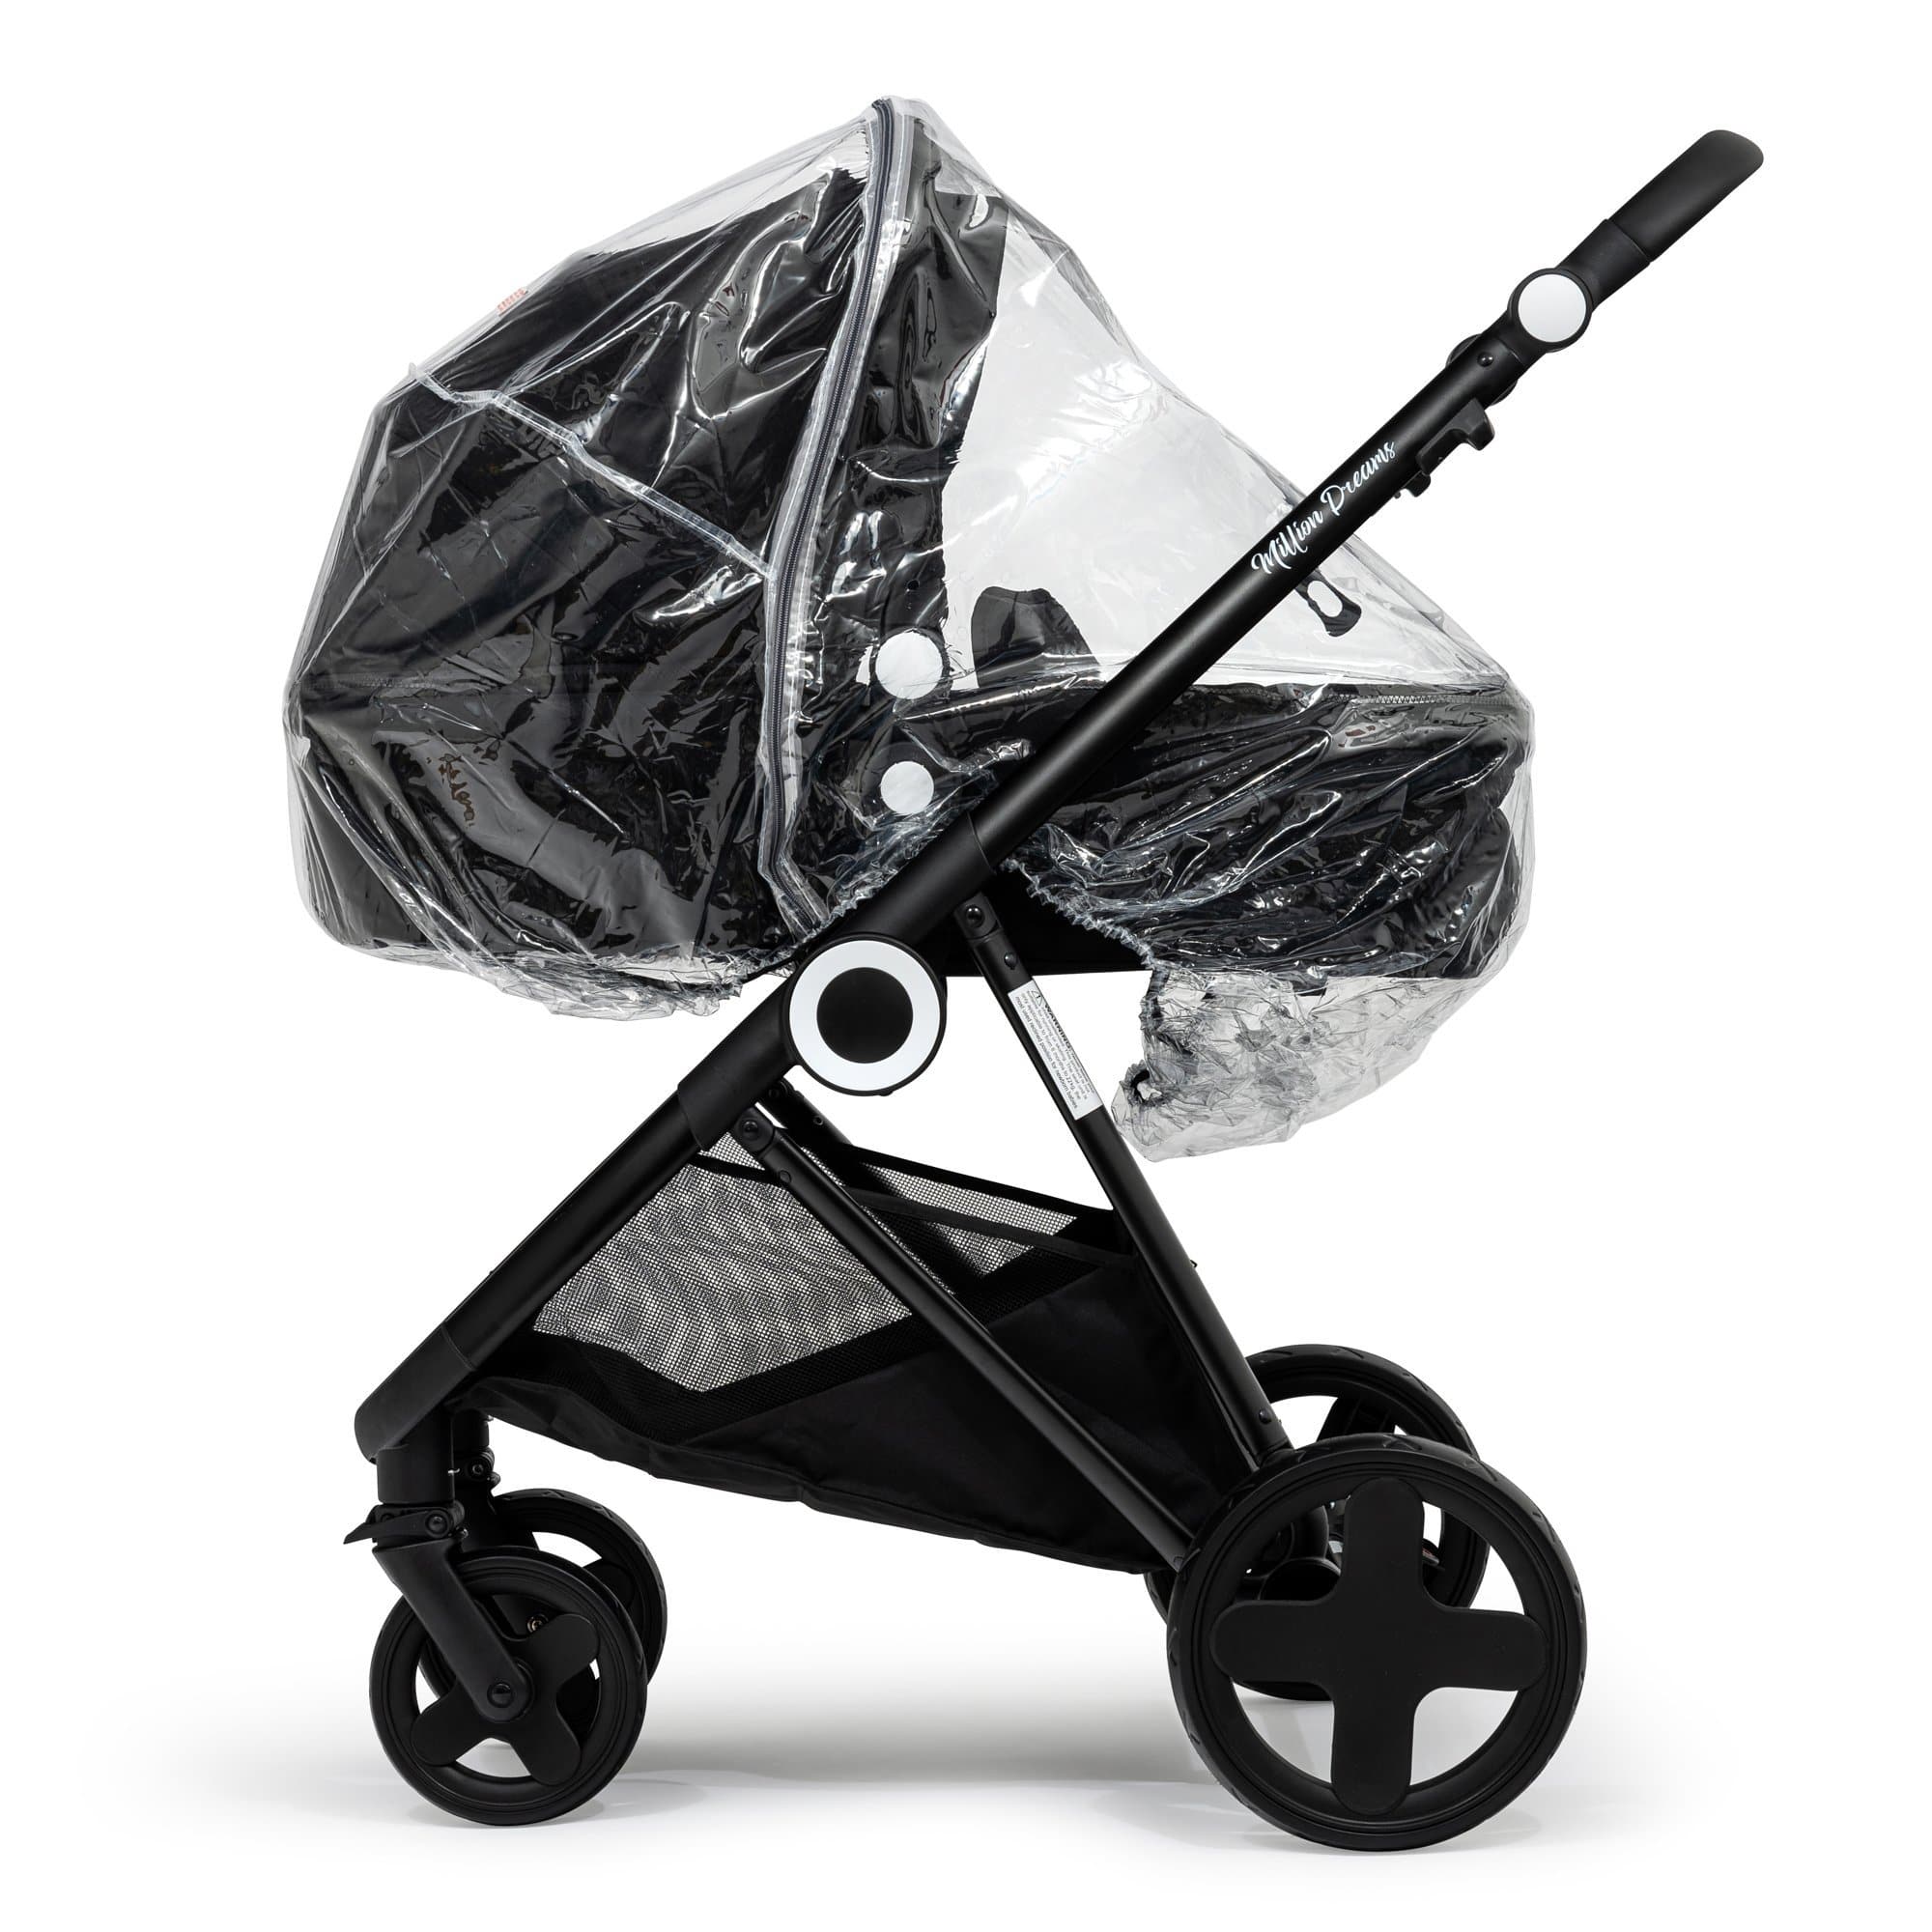 2 in 1 Rain Cover Compatible with Diono - Fits All Models - For Your Little One